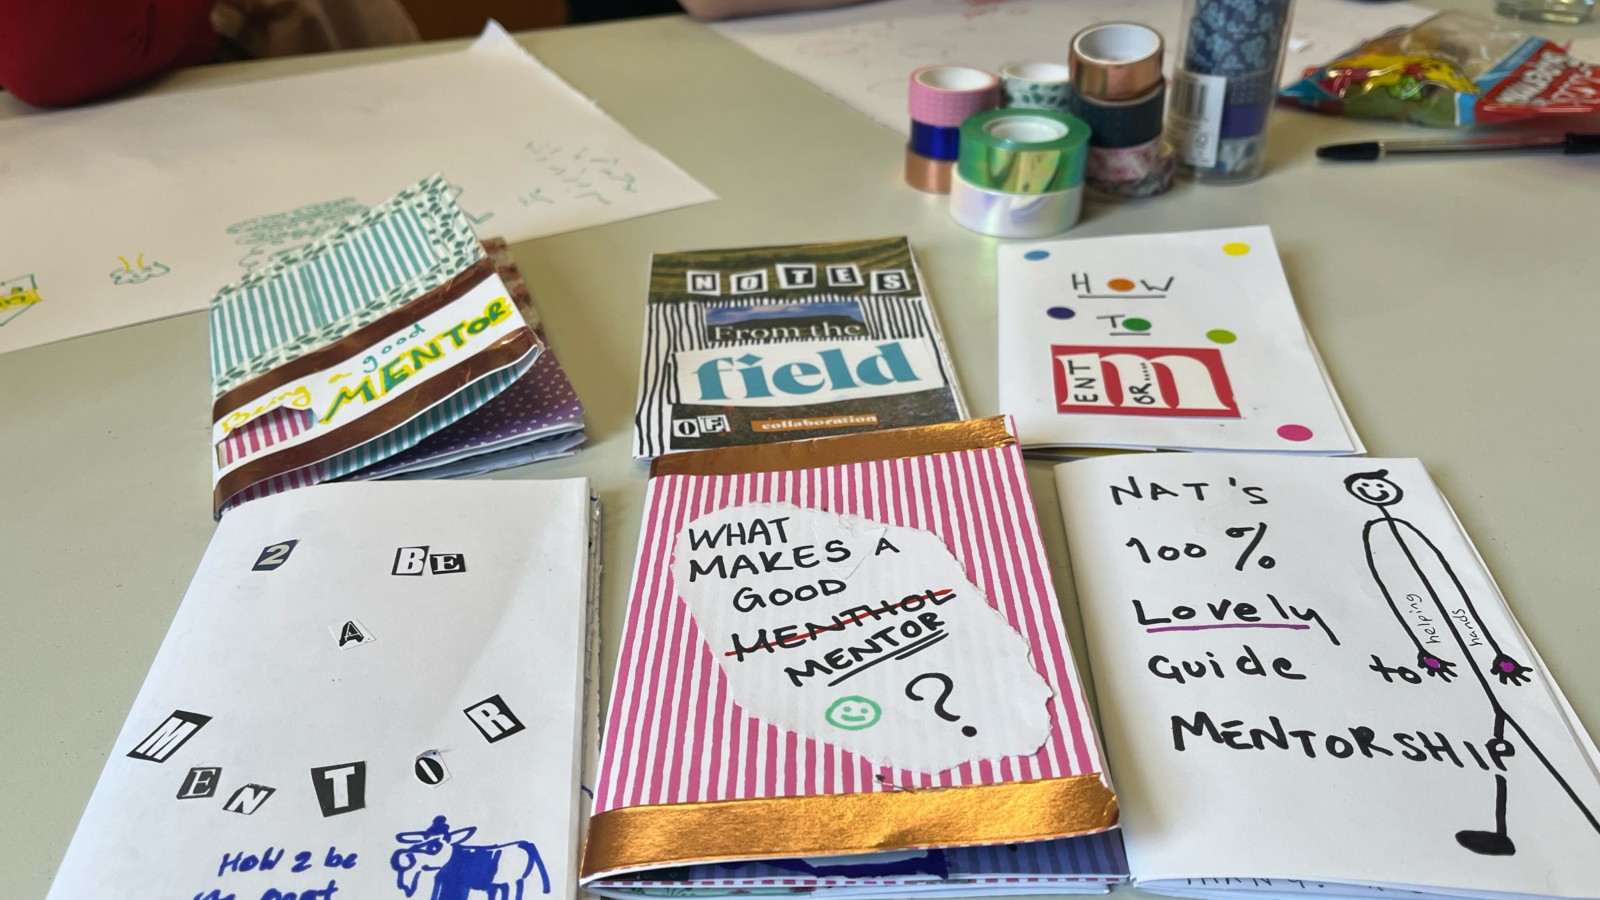 6 zines are laid out on a table, they are named things such as 'how 2 be the goat’, ‘nat’s 100% lovely guide to mentorship’, ‘How to mentor’, ‘notes from the field of collaboration’ and ‘being a good mentor’. They are all hand made using materials such as collage and marker pen.